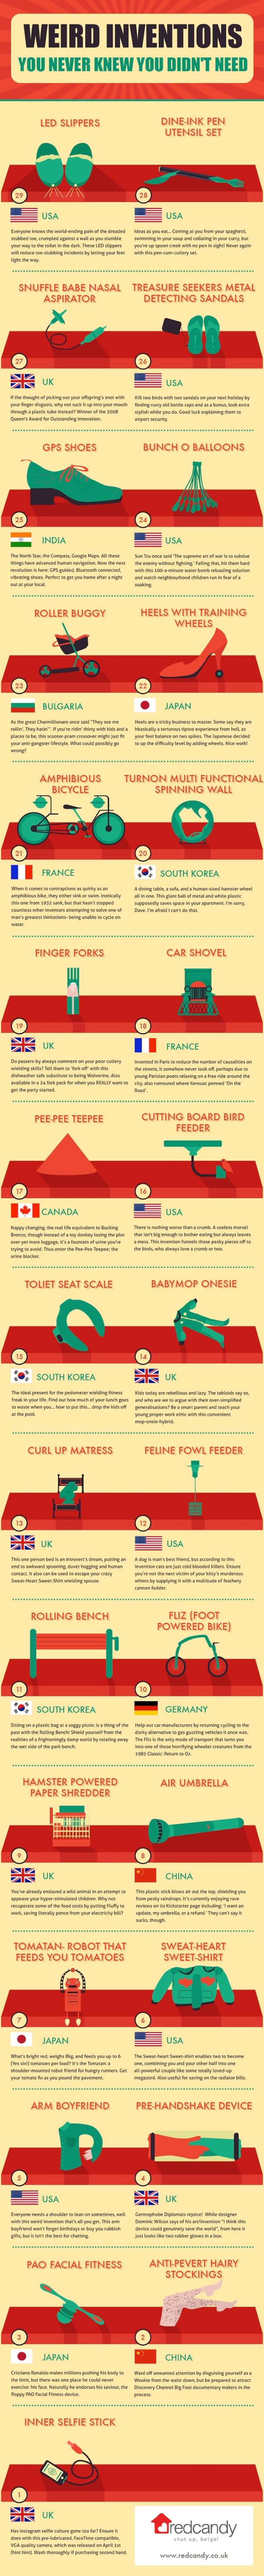 Ridiculous Inventions That The World Really Didn’t Need (infographic)